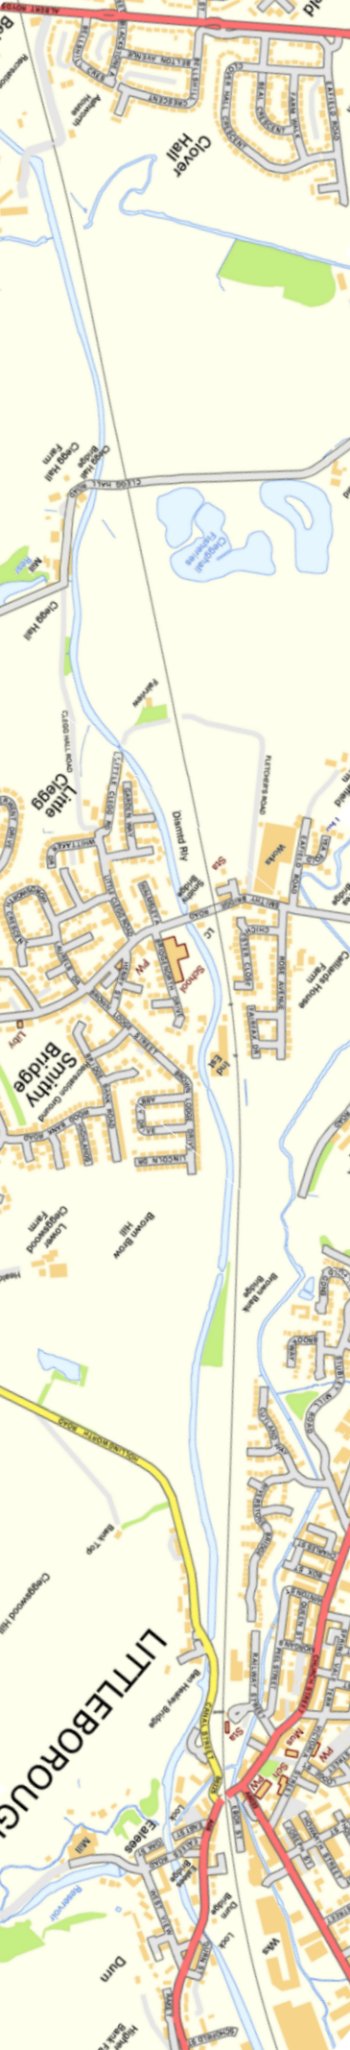 Section from Ordnance Survey OpenSource 2013 showing the L&YR railway line from Smithy Bridge to Littleborough